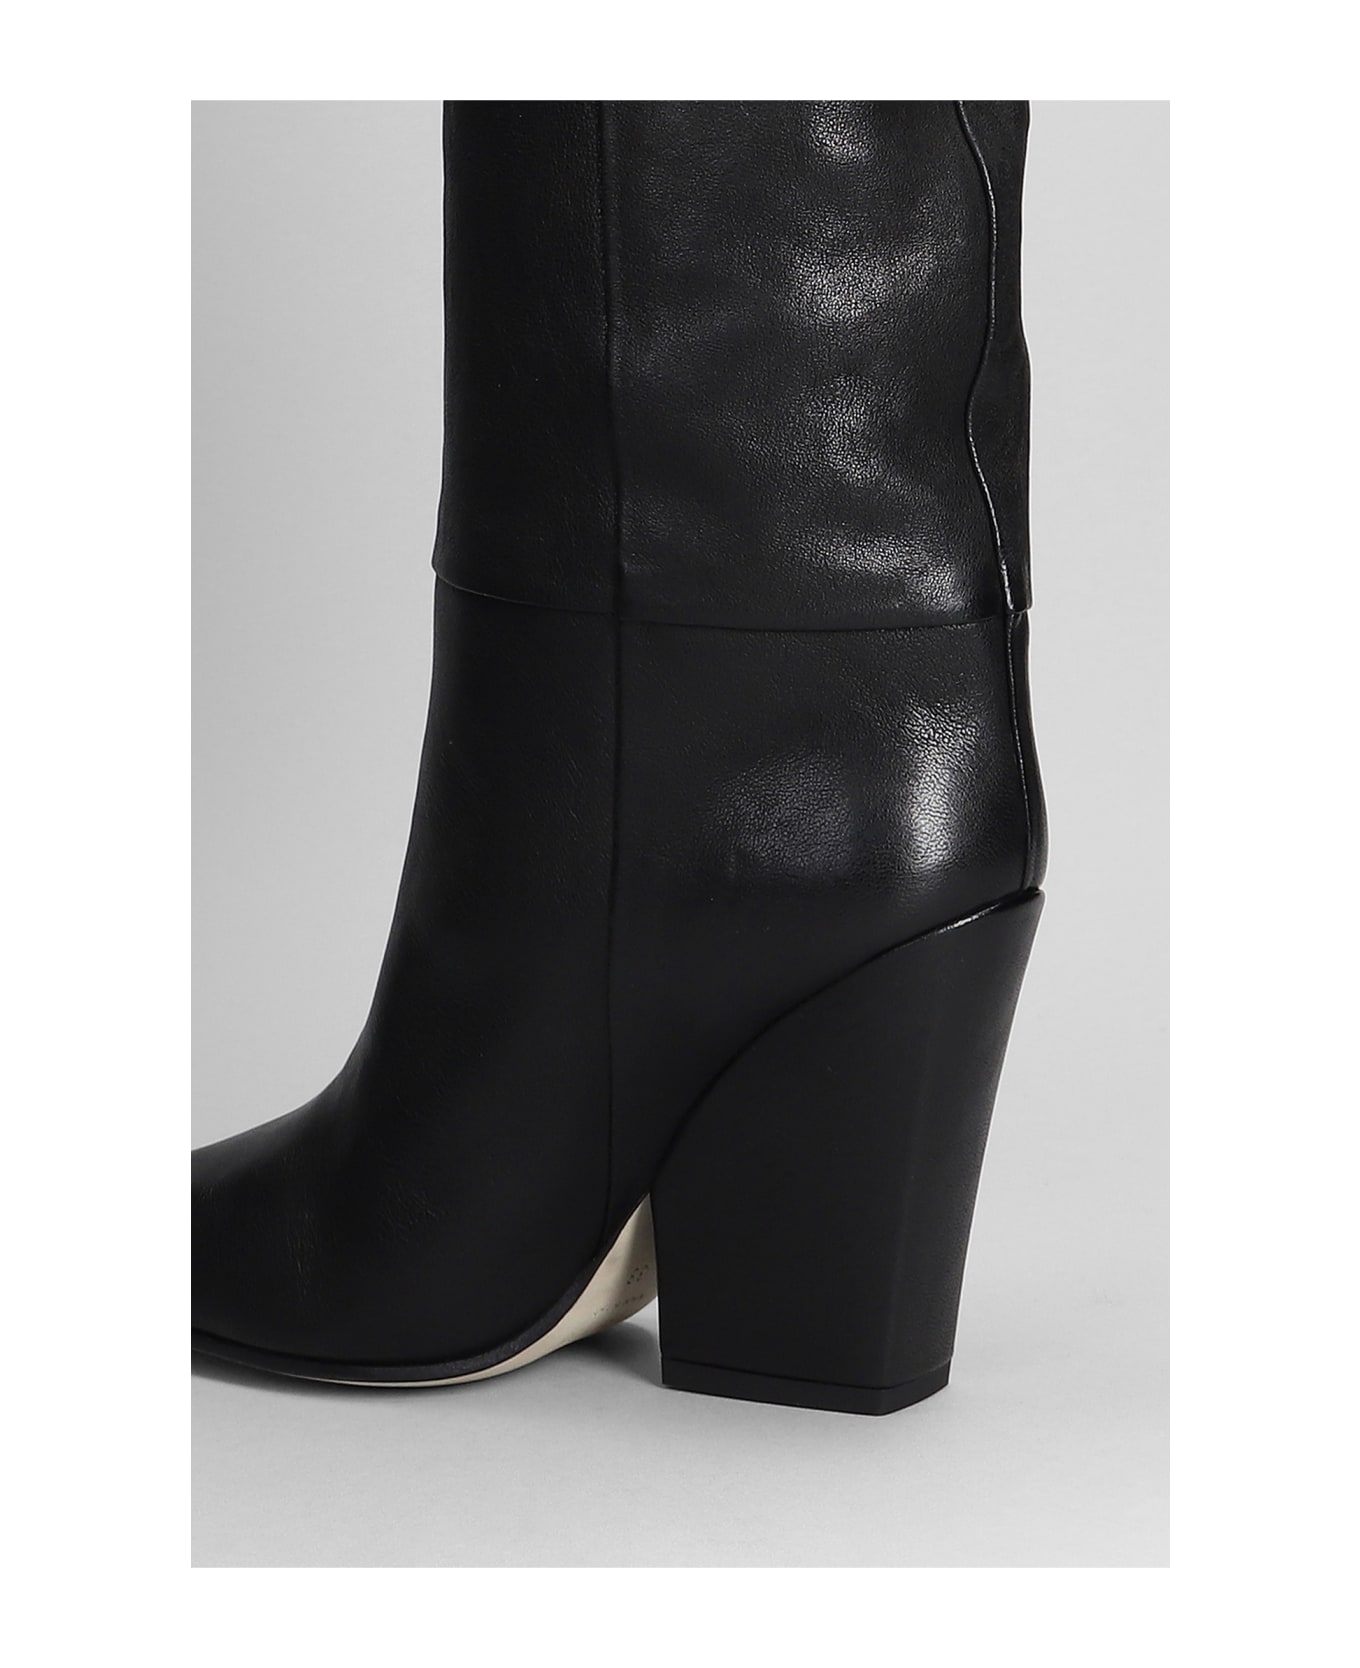 Paris Texas Jane High Heels Boots In Black Leather